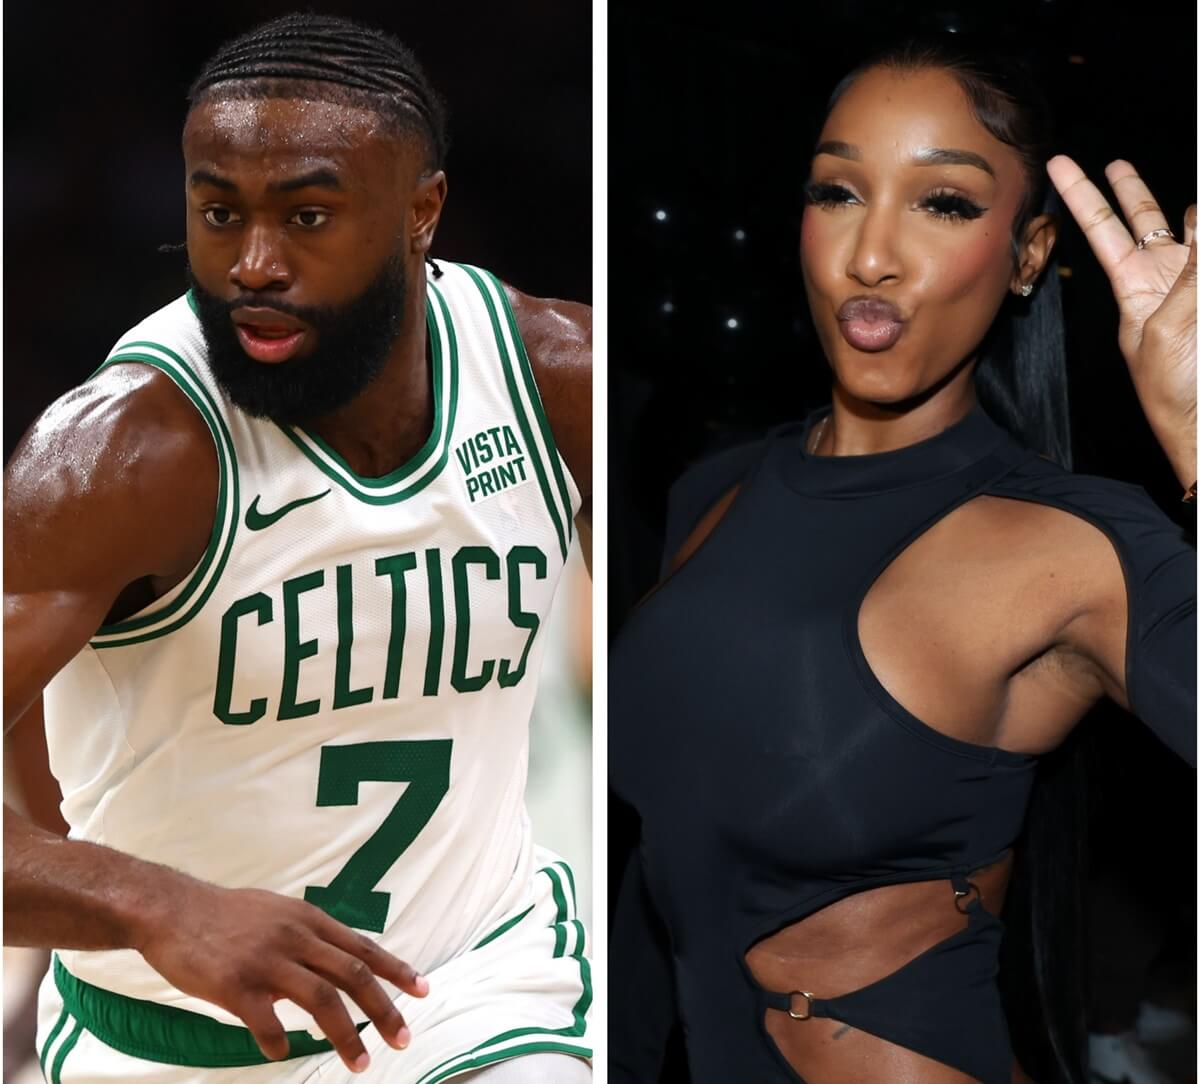 (L) Jaylen Brown playing in game against the Indiana Pacers, (R) Bernice Burgos posing for photo at an event in New Jersey